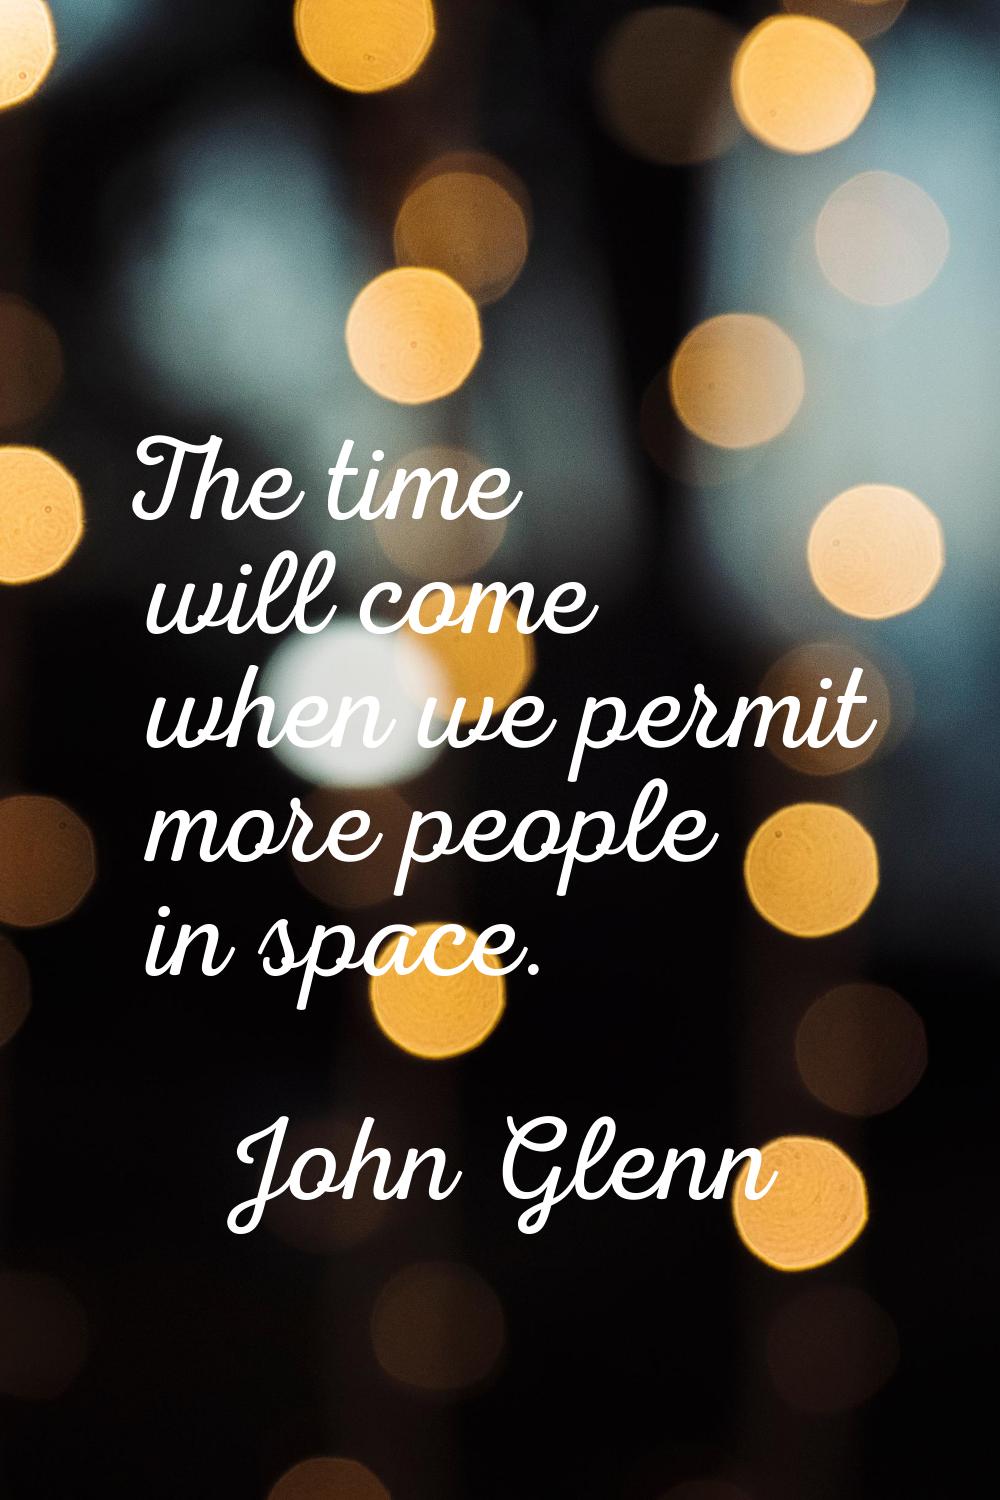 The time will come when we permit more people in space.